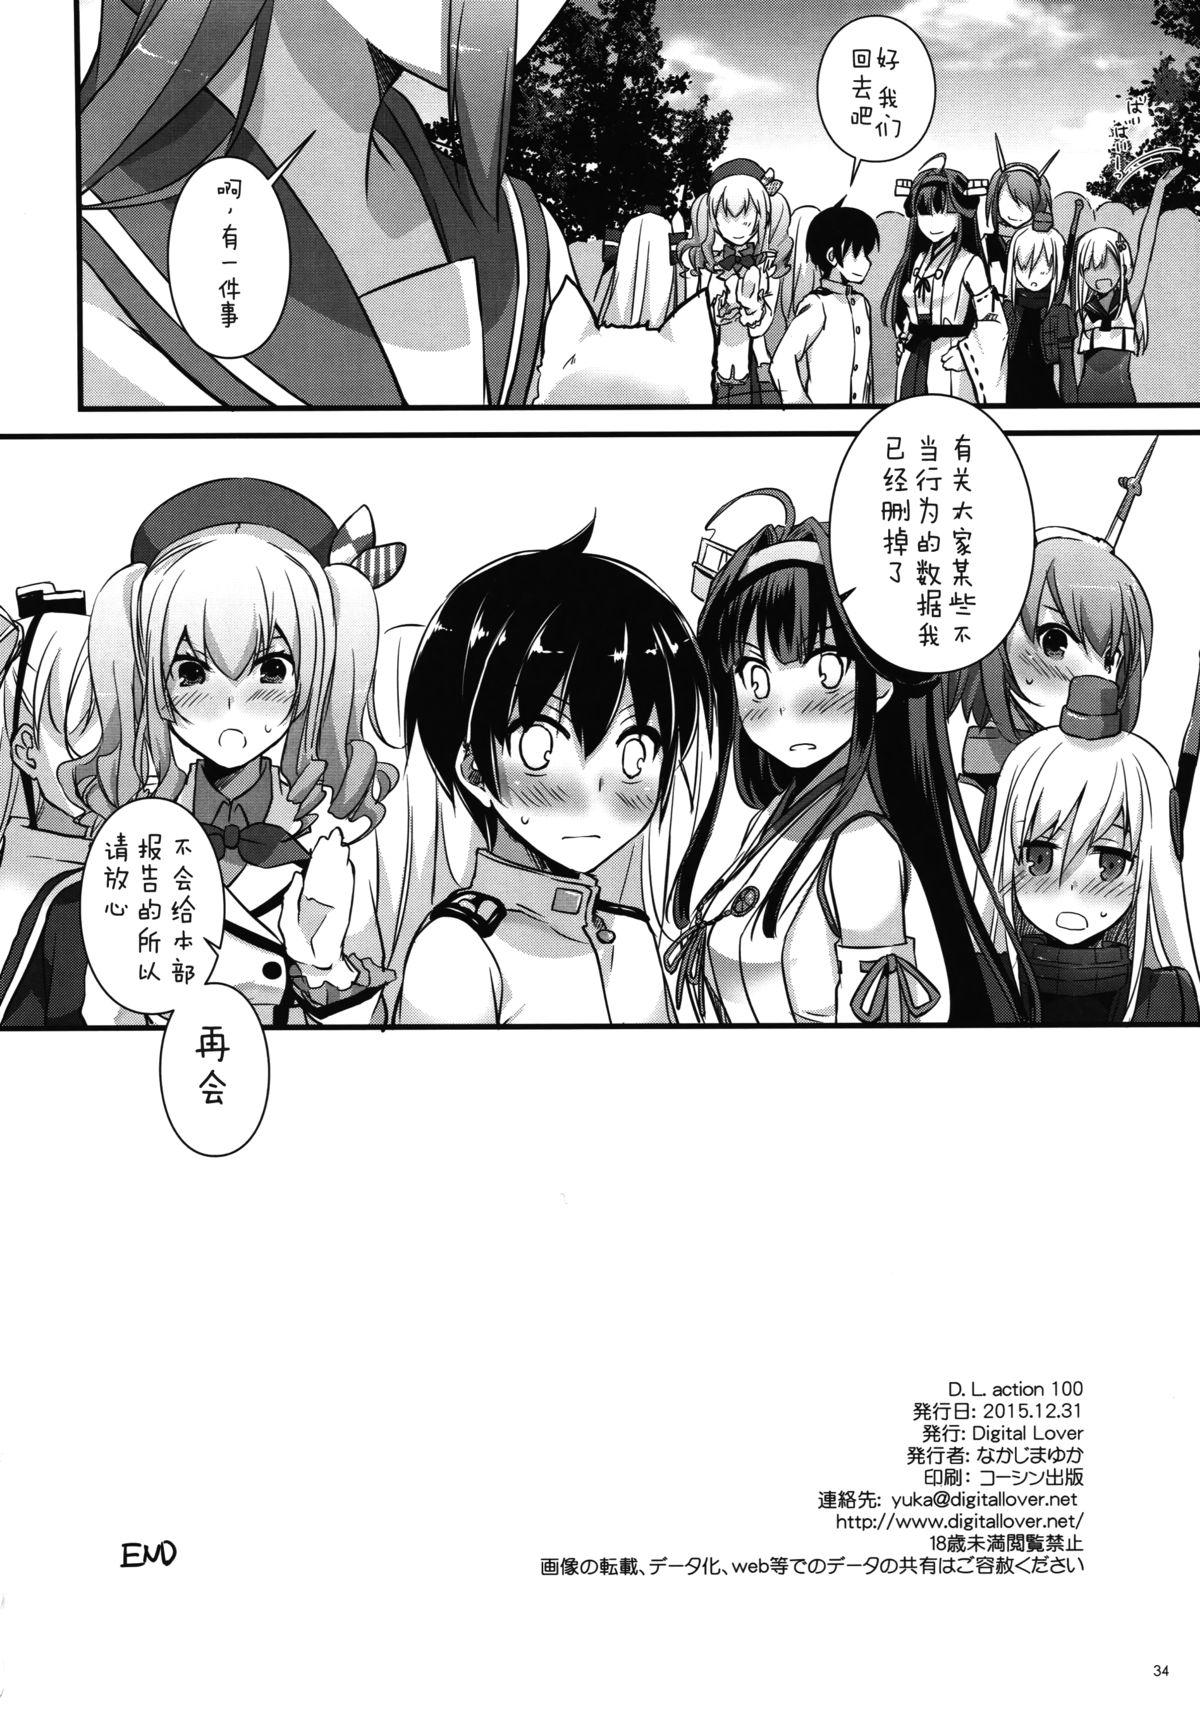 Flogging D.L. action 100 - Kantai collection Bear - Page 34